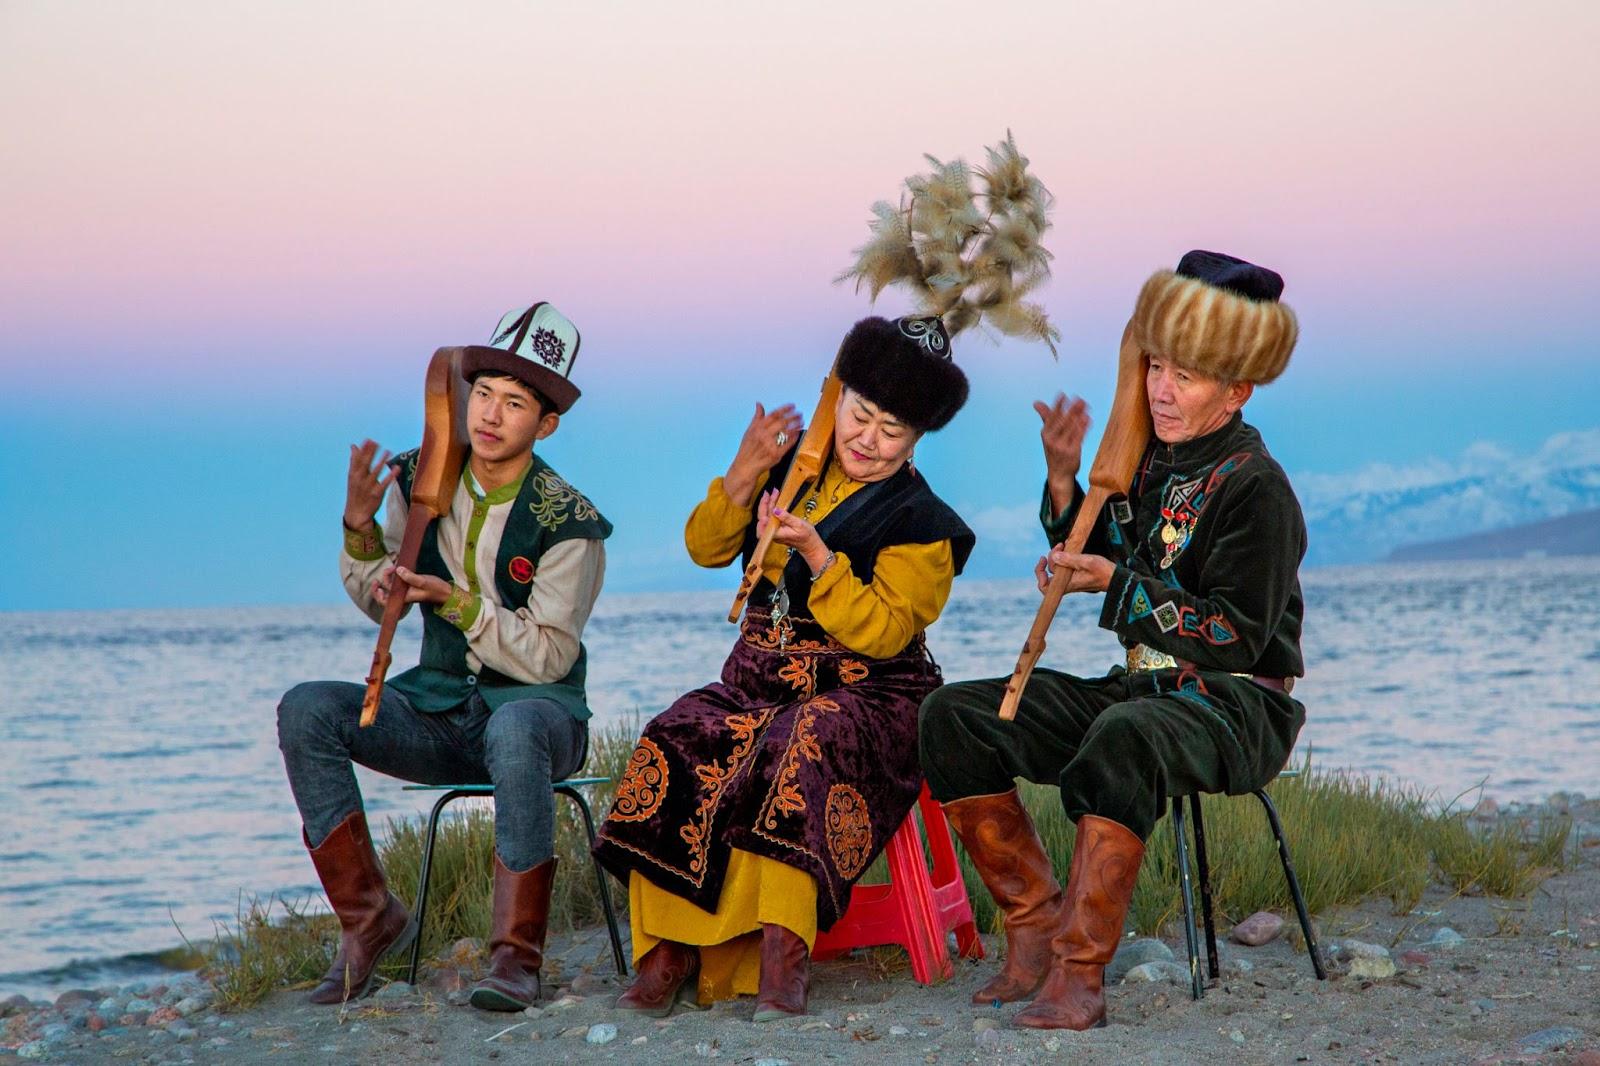 Musicians play local traditional instruments, in Issyk Kul, Kyrgyzstan.